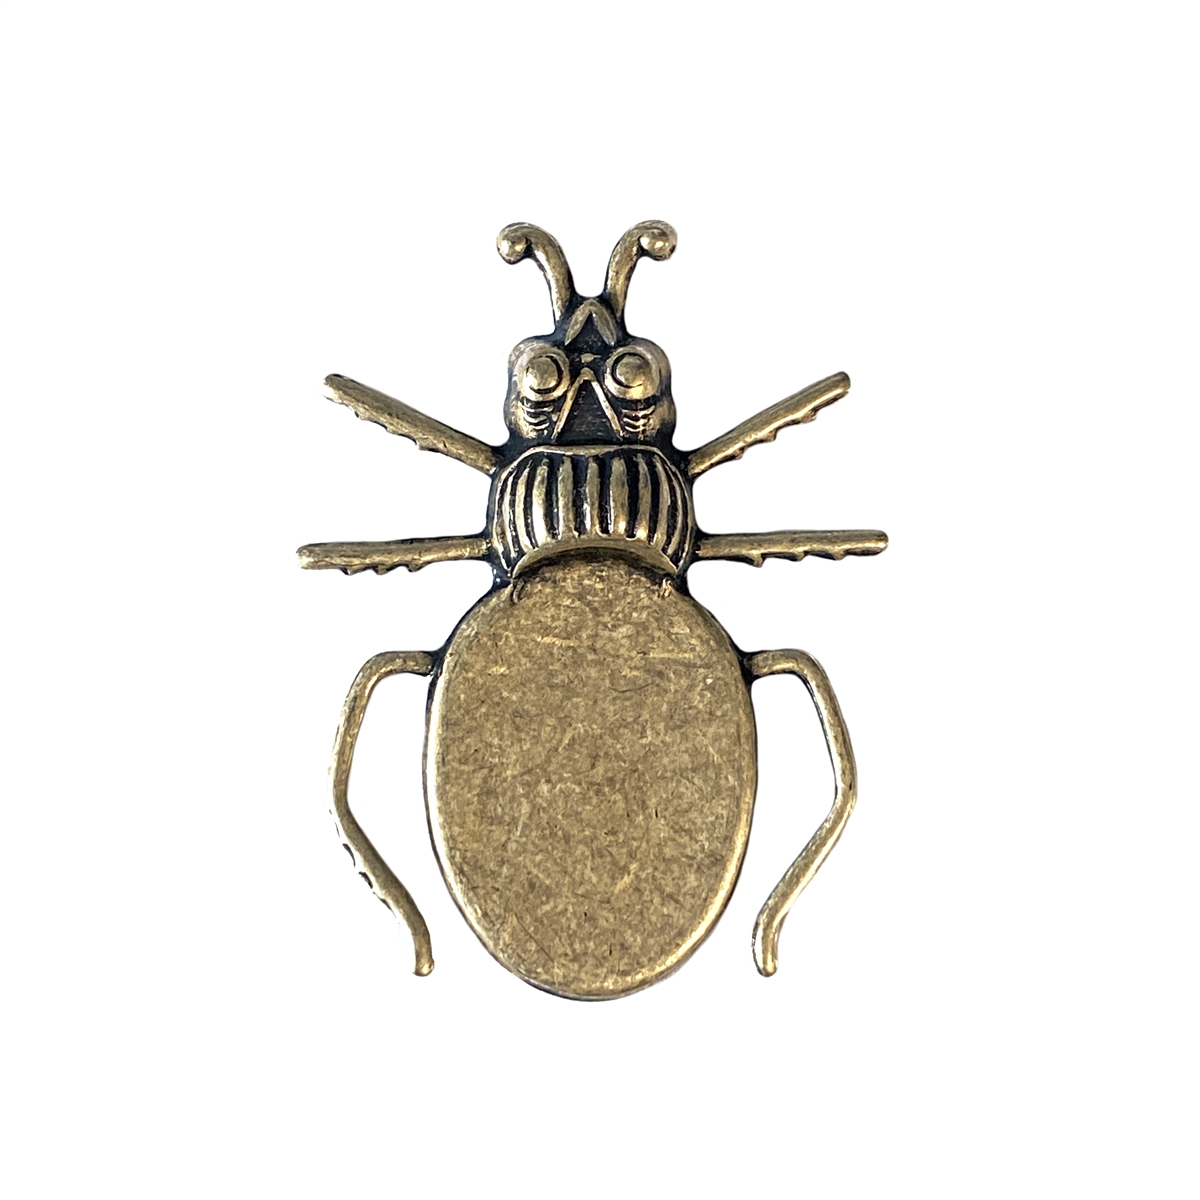 gold tone, bee charms, 08778, zinc castings, vintage jewelry supplies,  insect charms, charm bracelets, bugs, bee, insects, gold charms, B'sue  Boutiques, jewelry making, jewelry supplies, 6 pieces, cast zinc, zinc  alloy, zinc